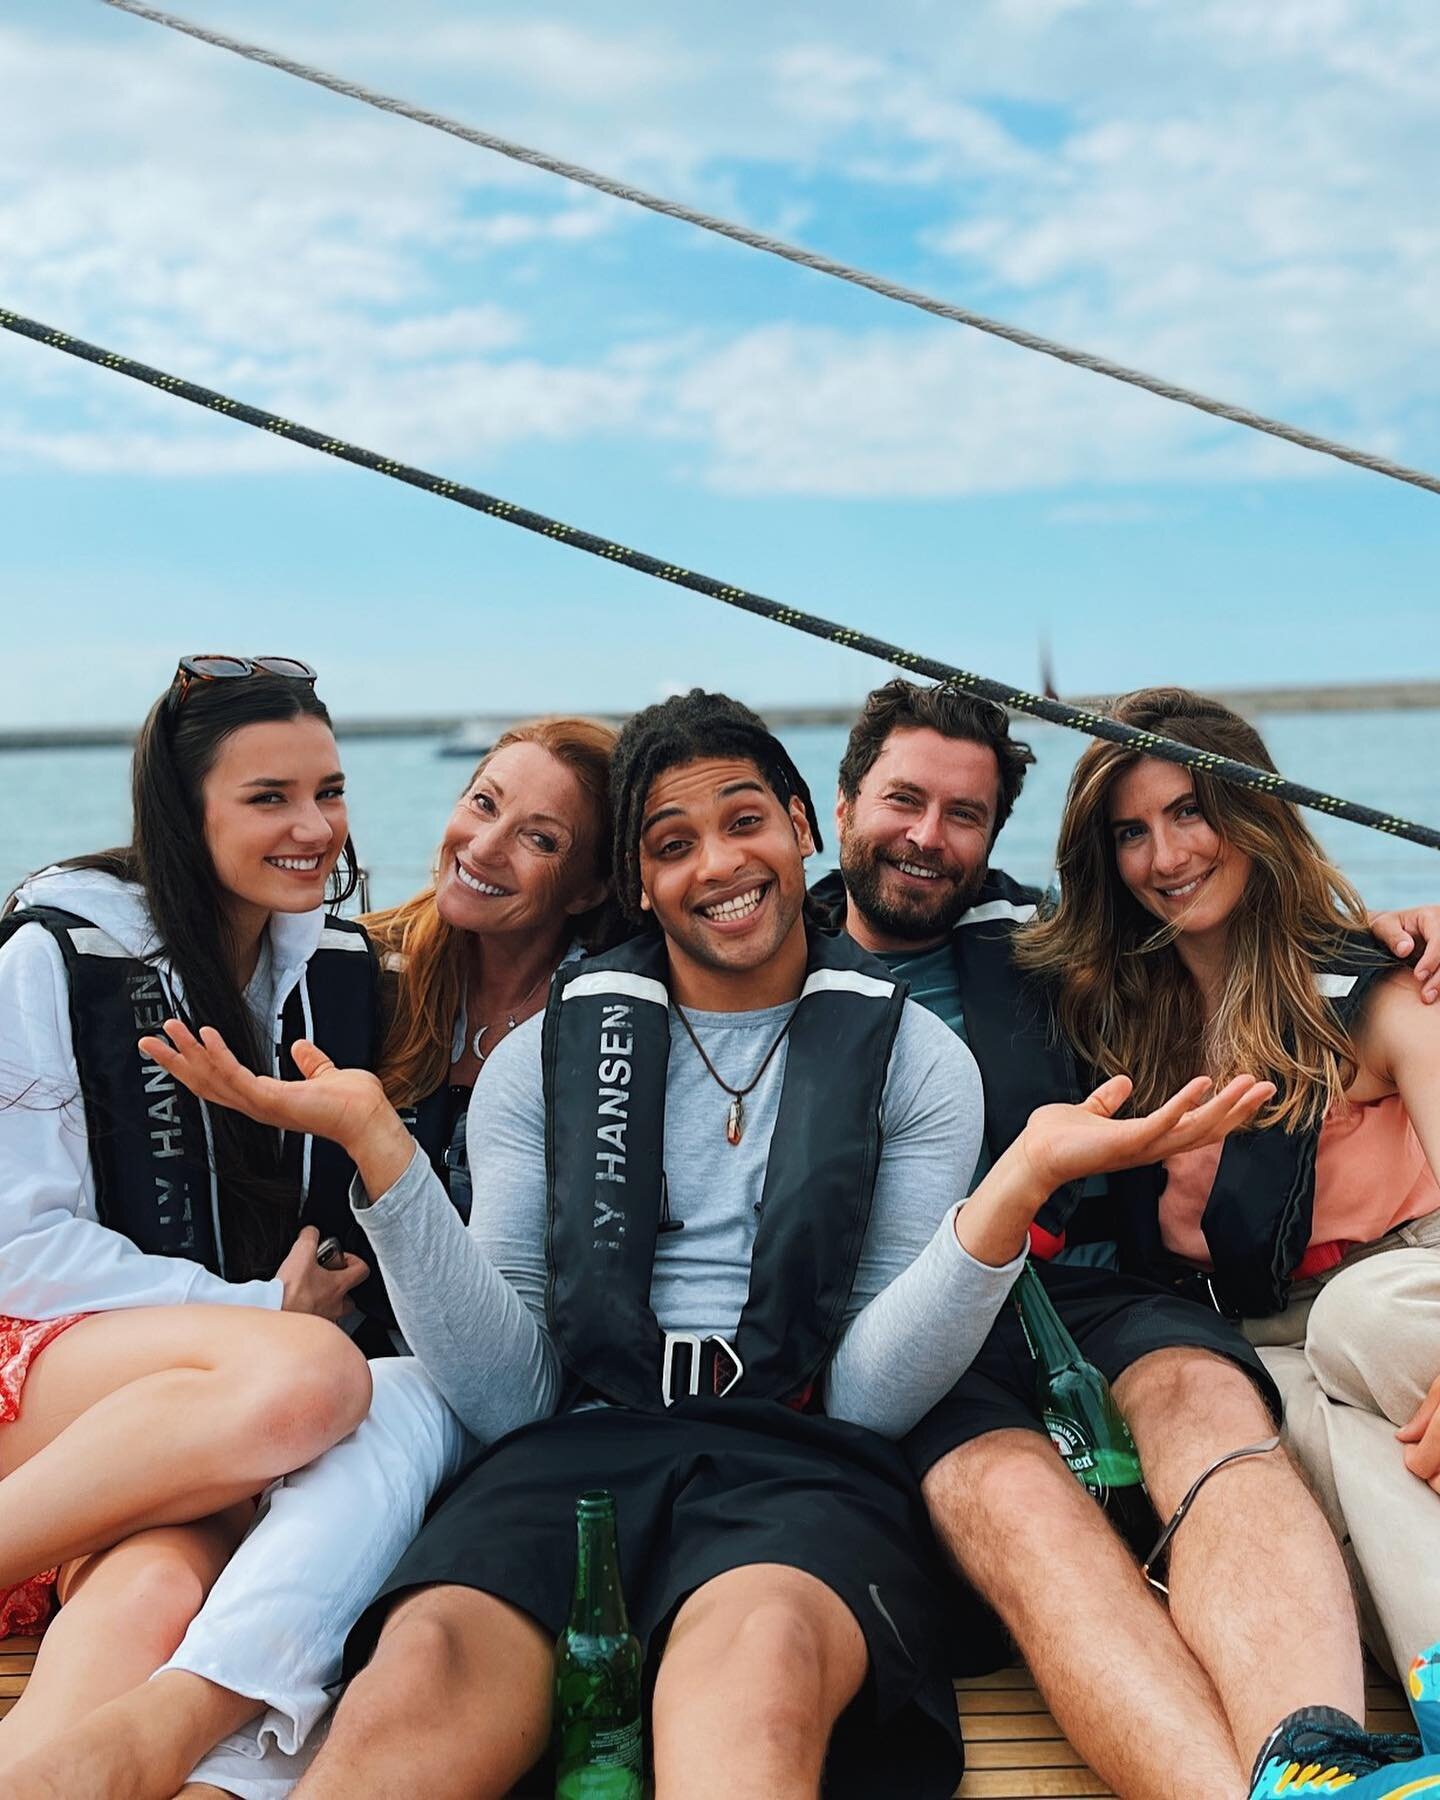 We had a great time on the water! 😄 I took some of the #HarryWild family out to sail on what turned out to be a perfect summer day! ☀️ This was such a spontaneous, last minute idea, but a memory we&rsquo;ll all remember forever. 💗